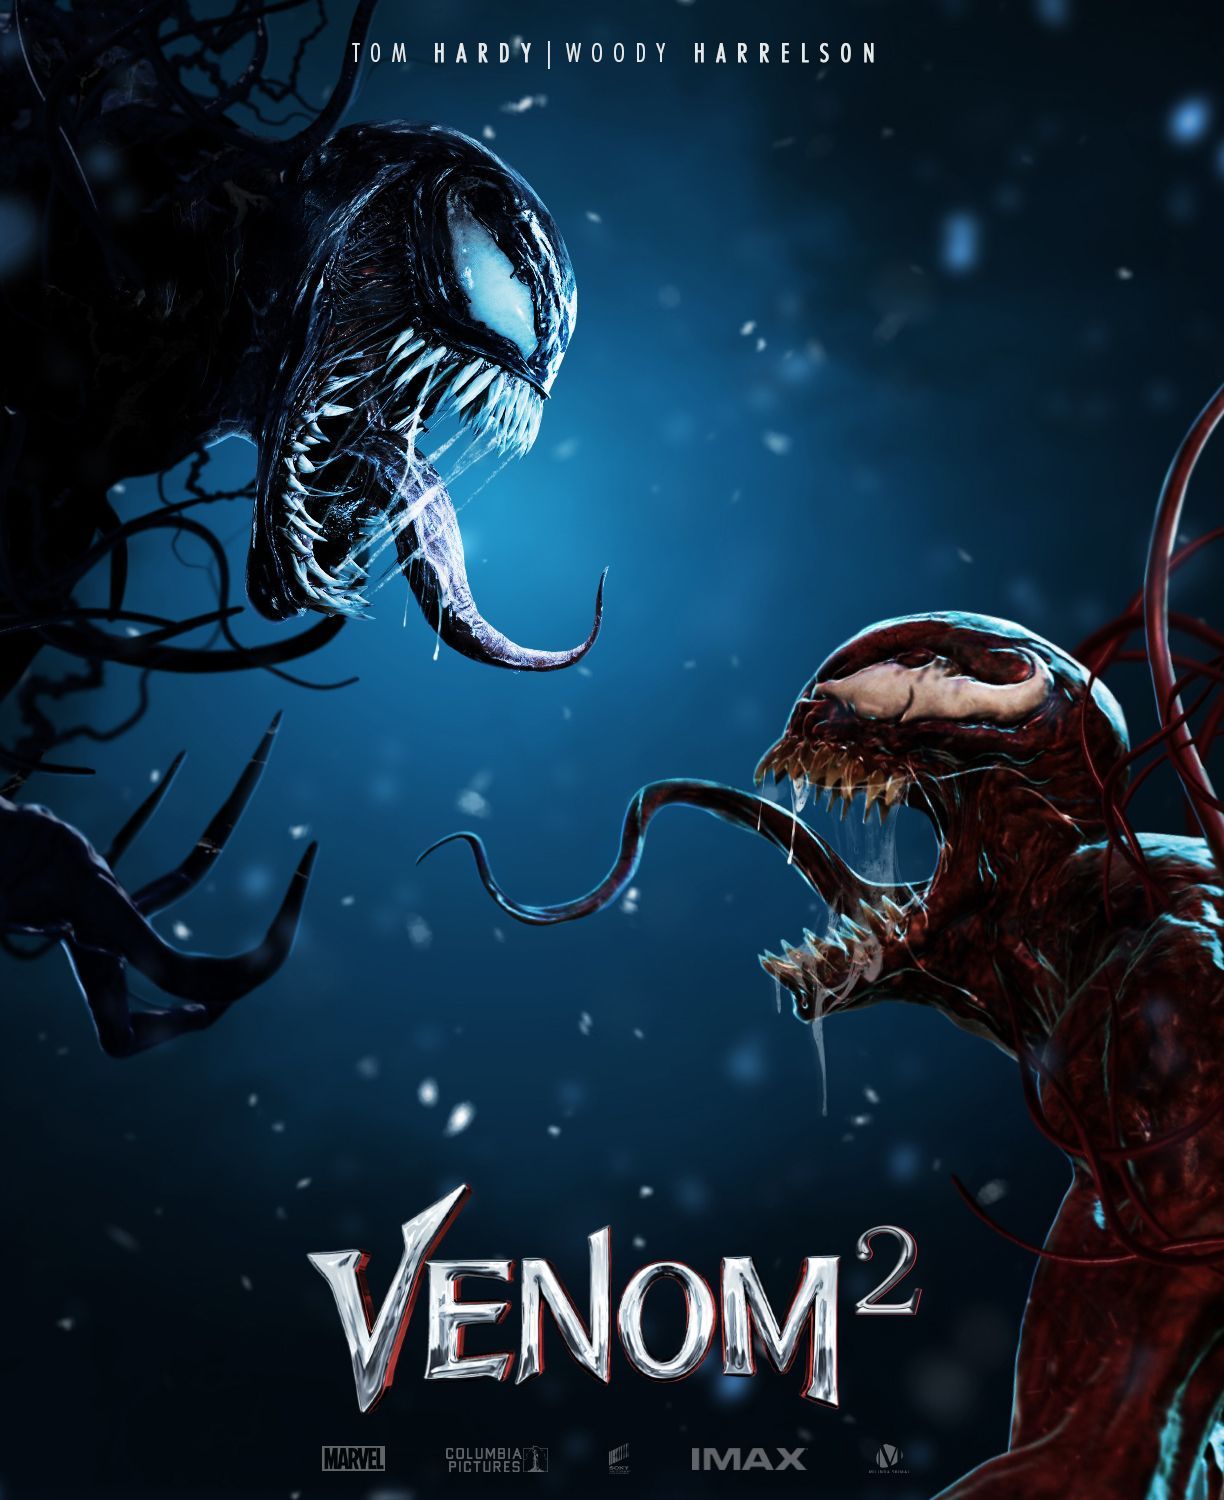 stream venom let there be carnage